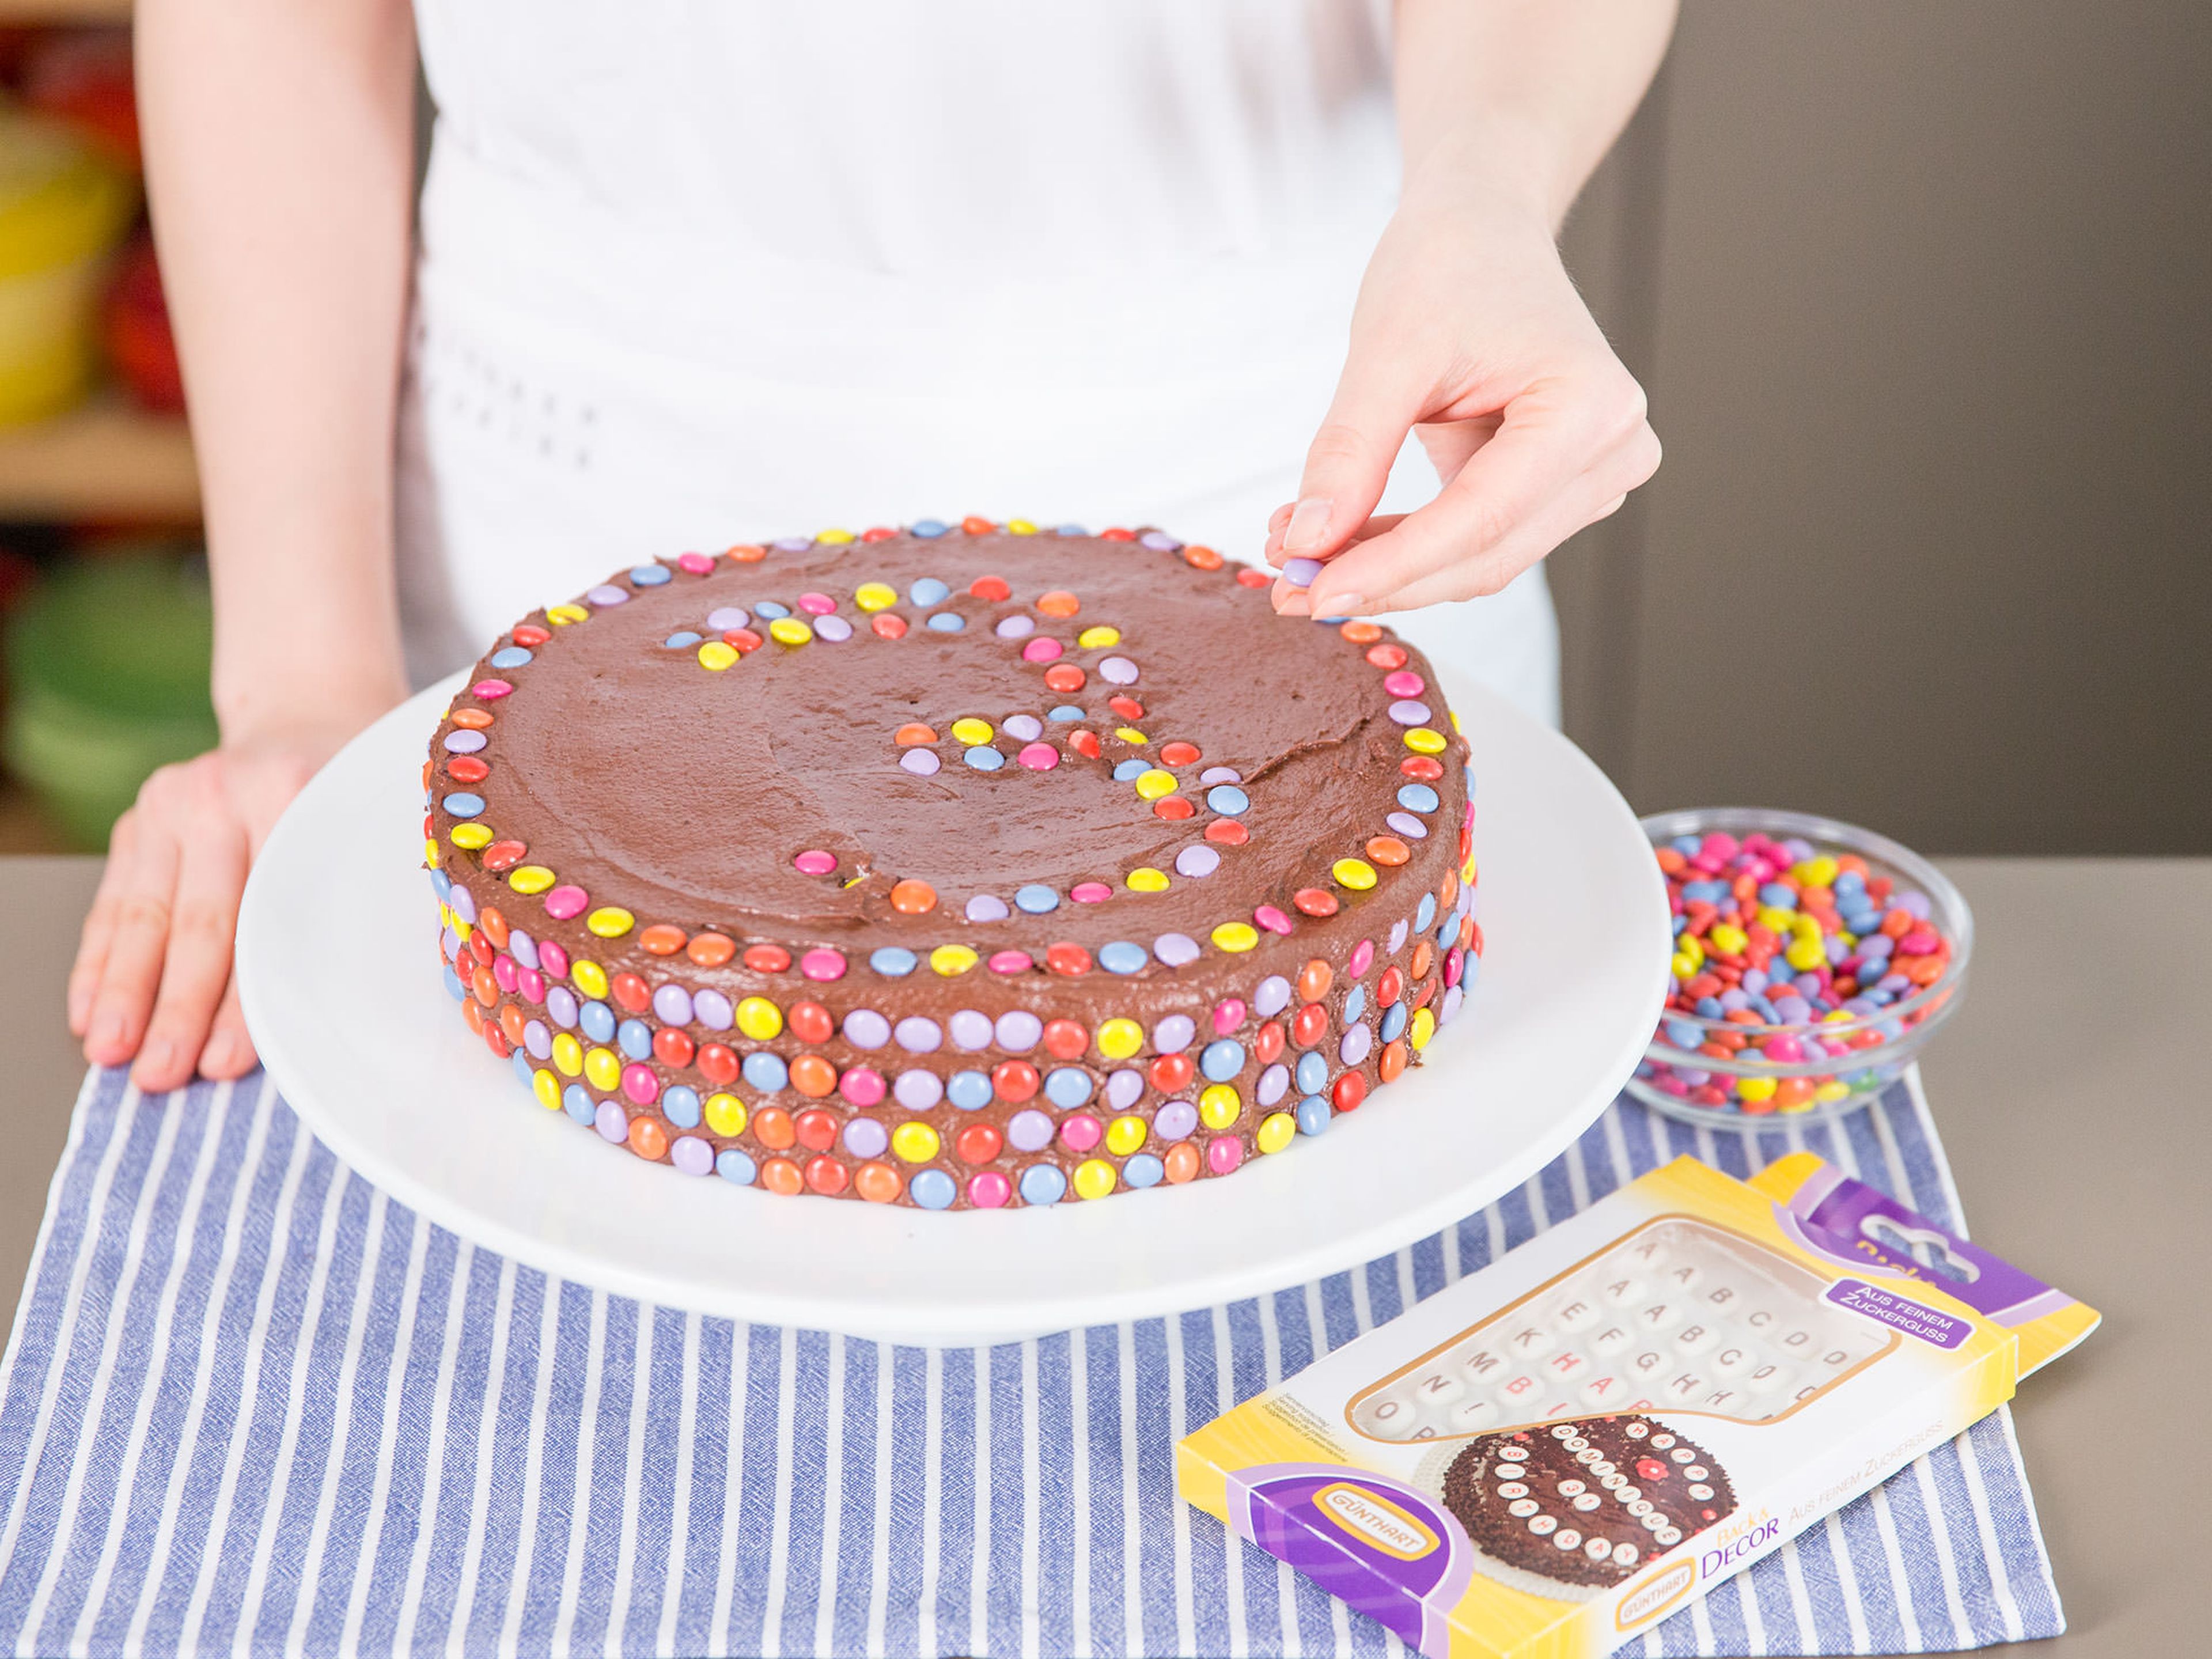 Frost cooled cake with buttercream and cover in Smarties by gently pressing the candies into buttercream.